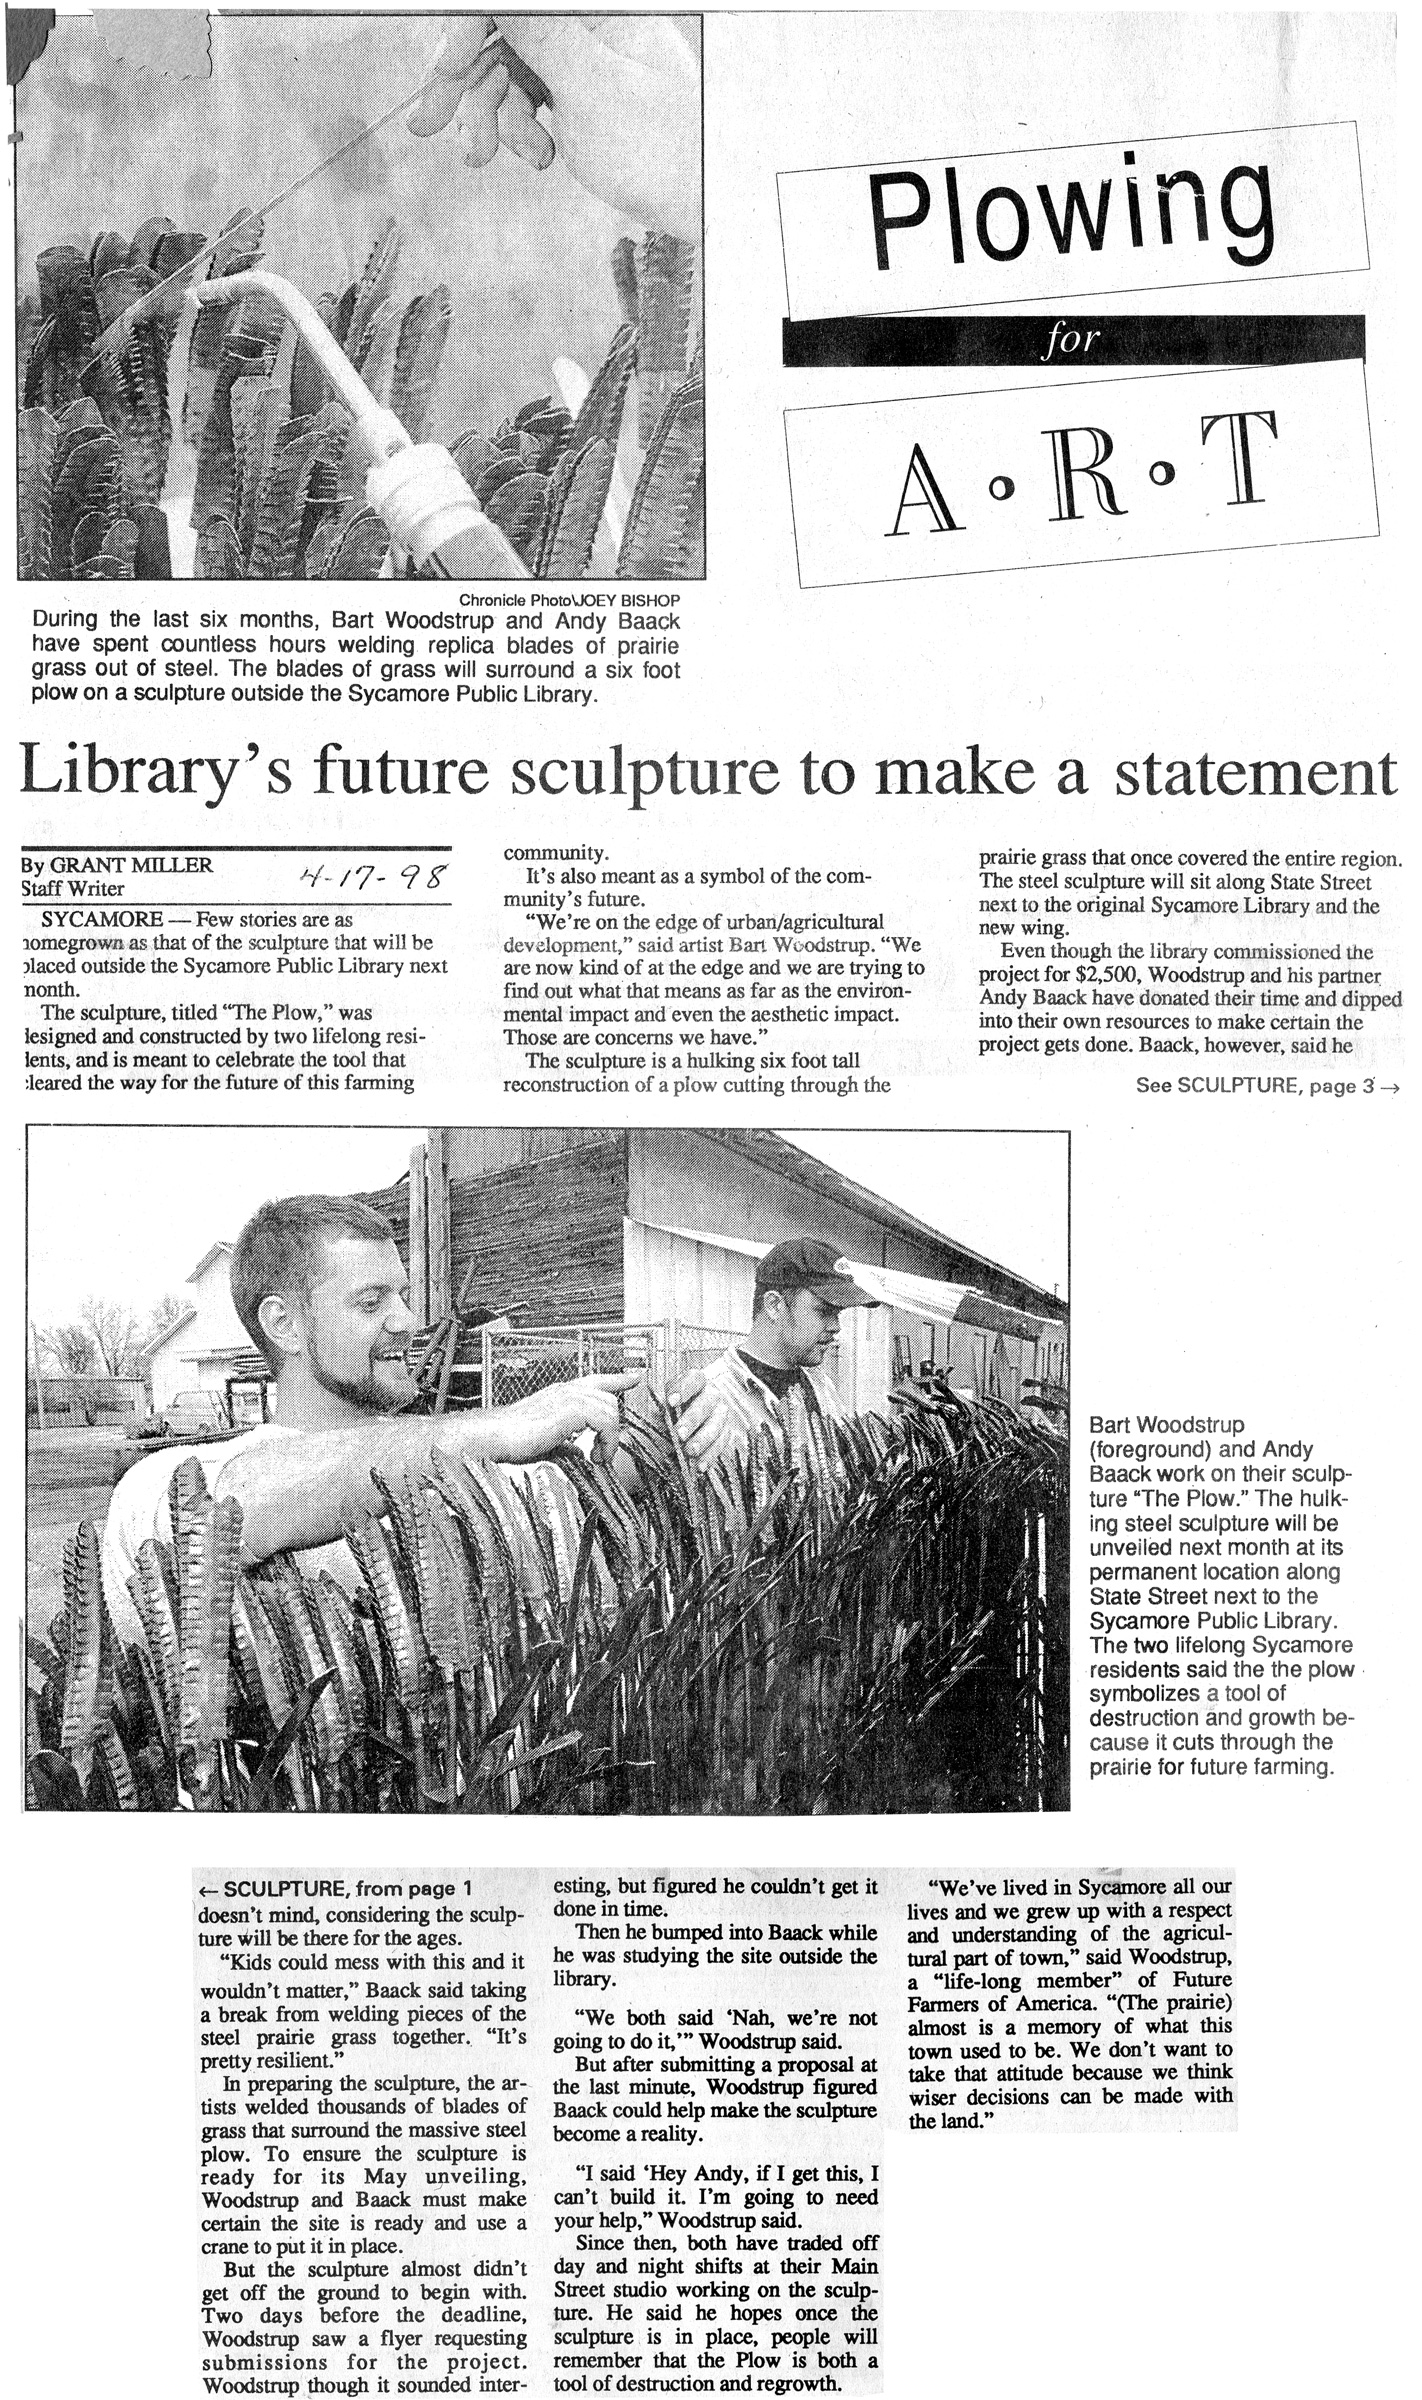 A local news article about the sculpture.